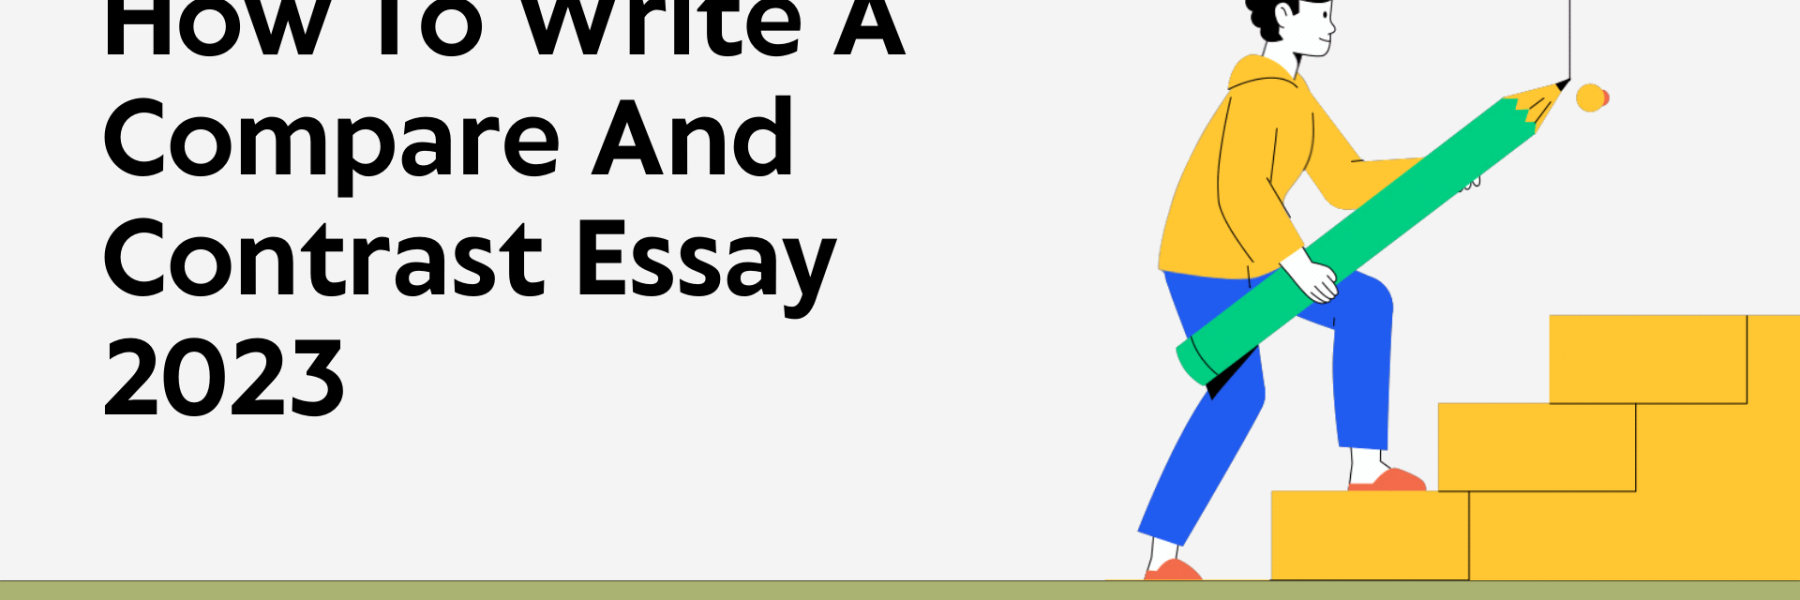 How To Write a Compare and Contrast Essay 2023